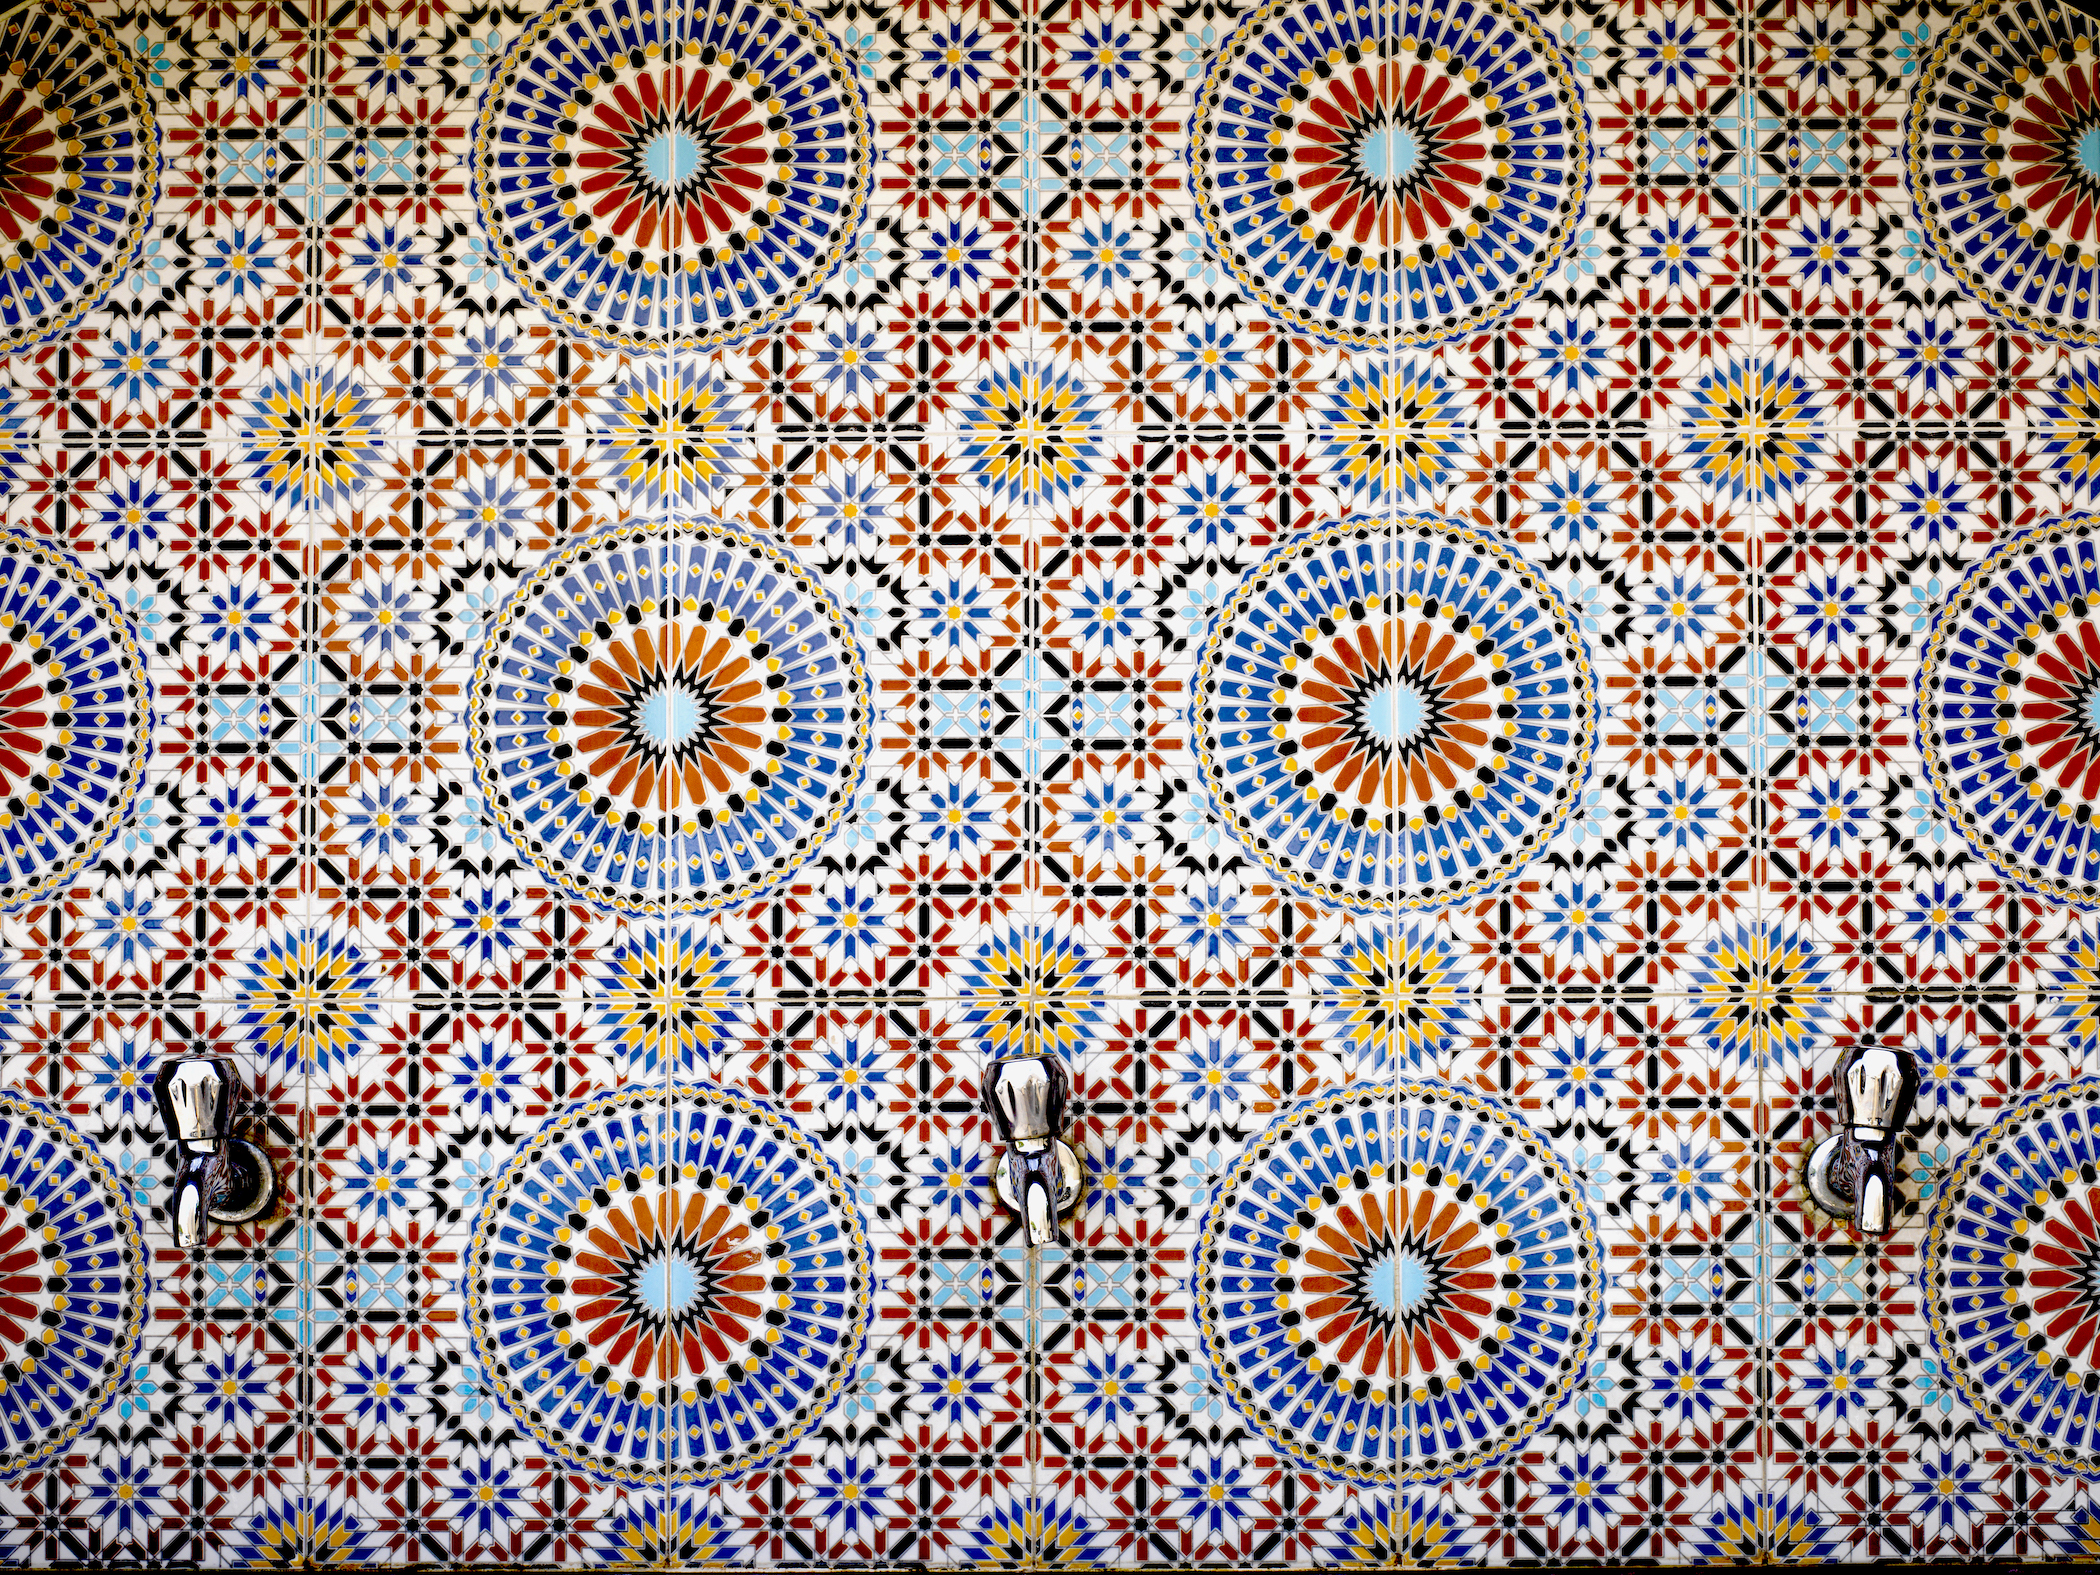 Geometric tiled wall in orange, blue, and yellow with three faucets at the bottom